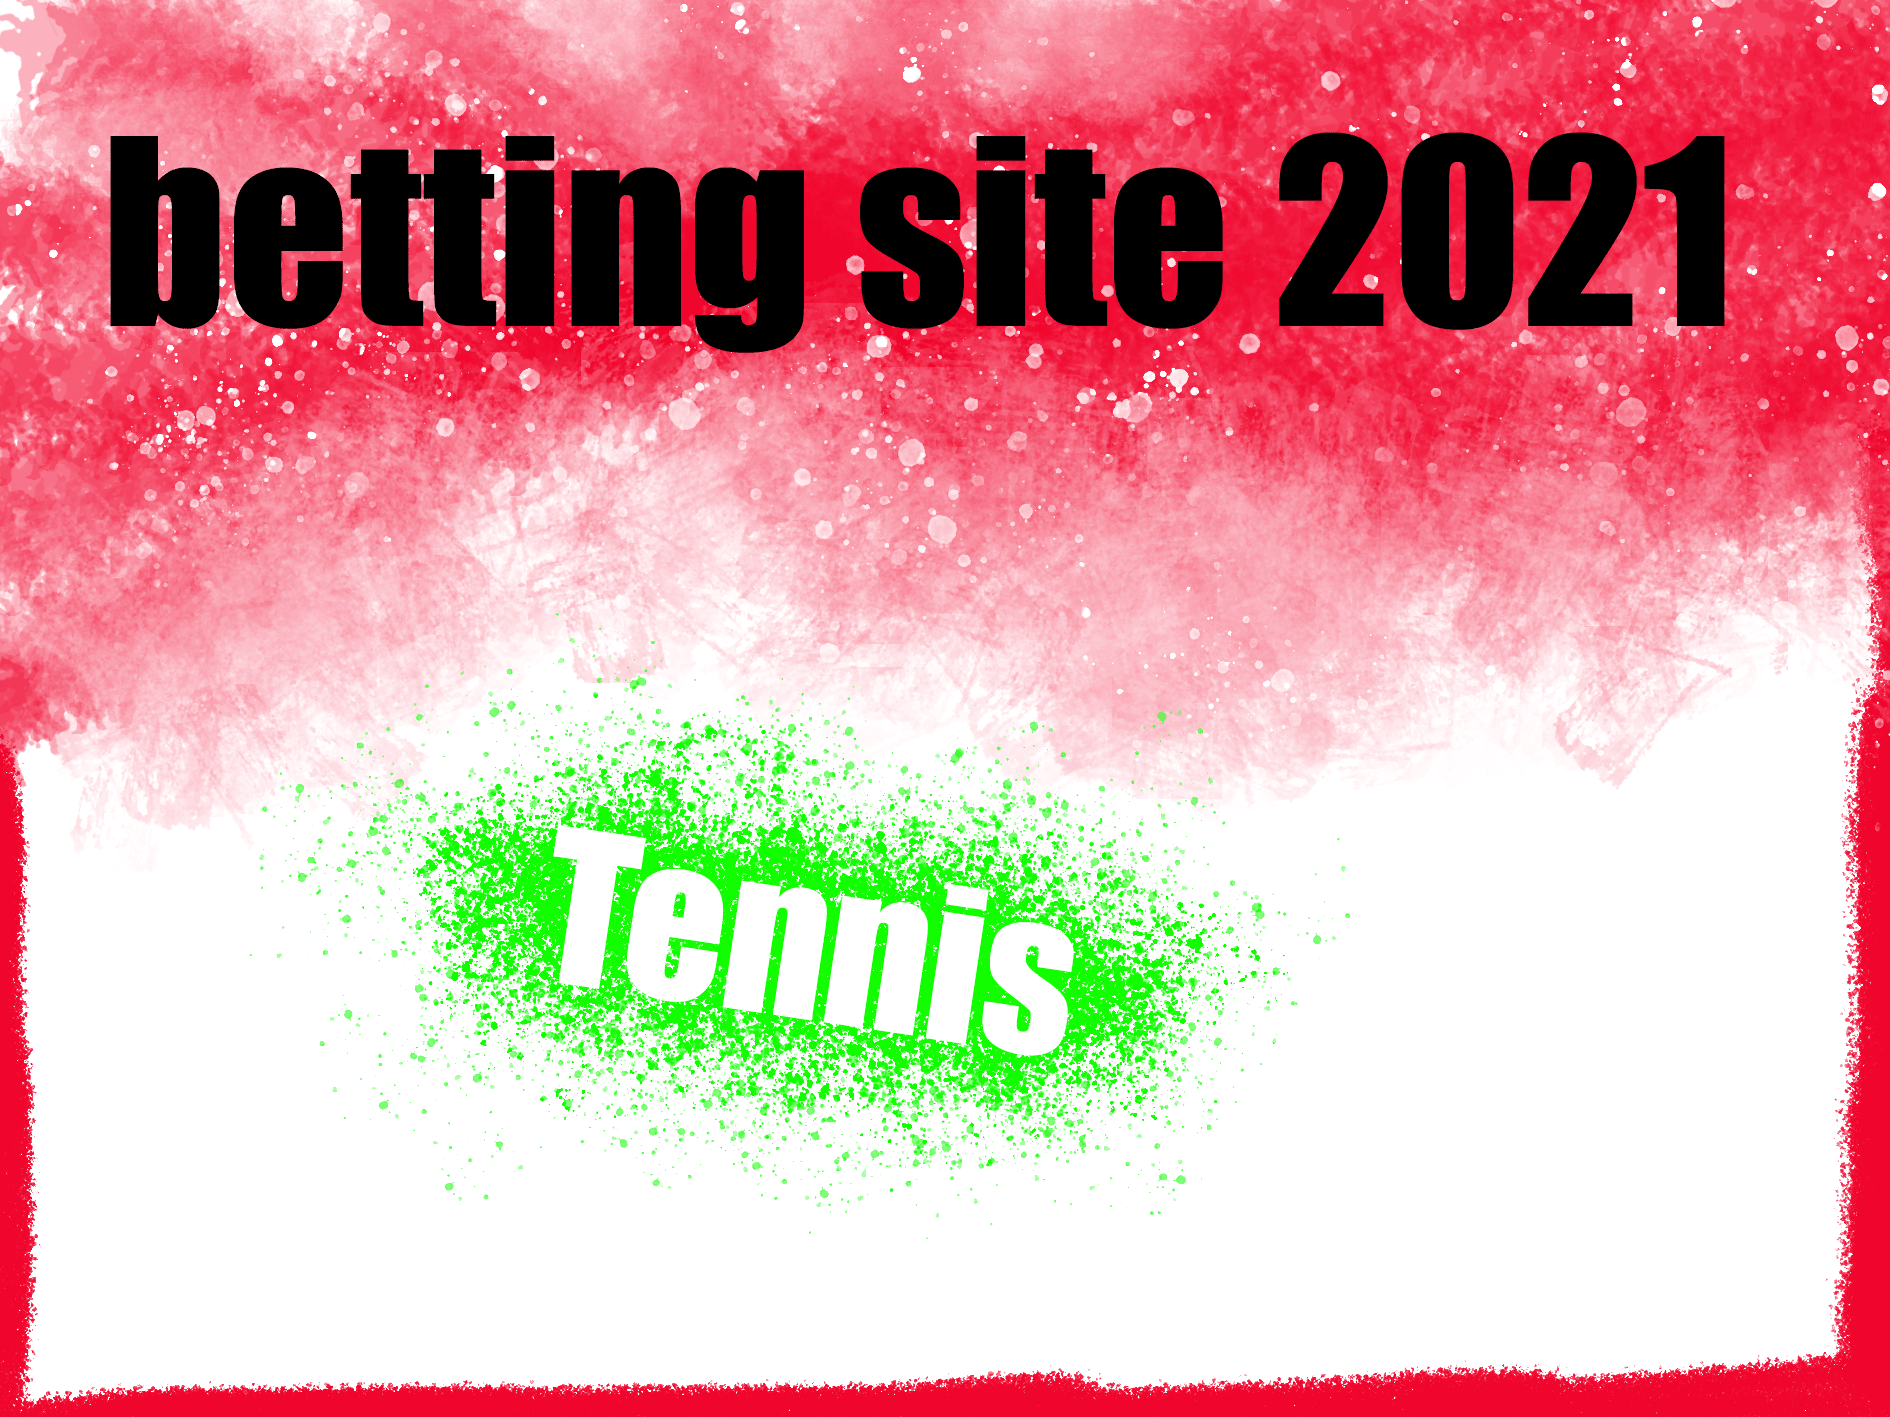 Best Tennis Betting Sites For 2021